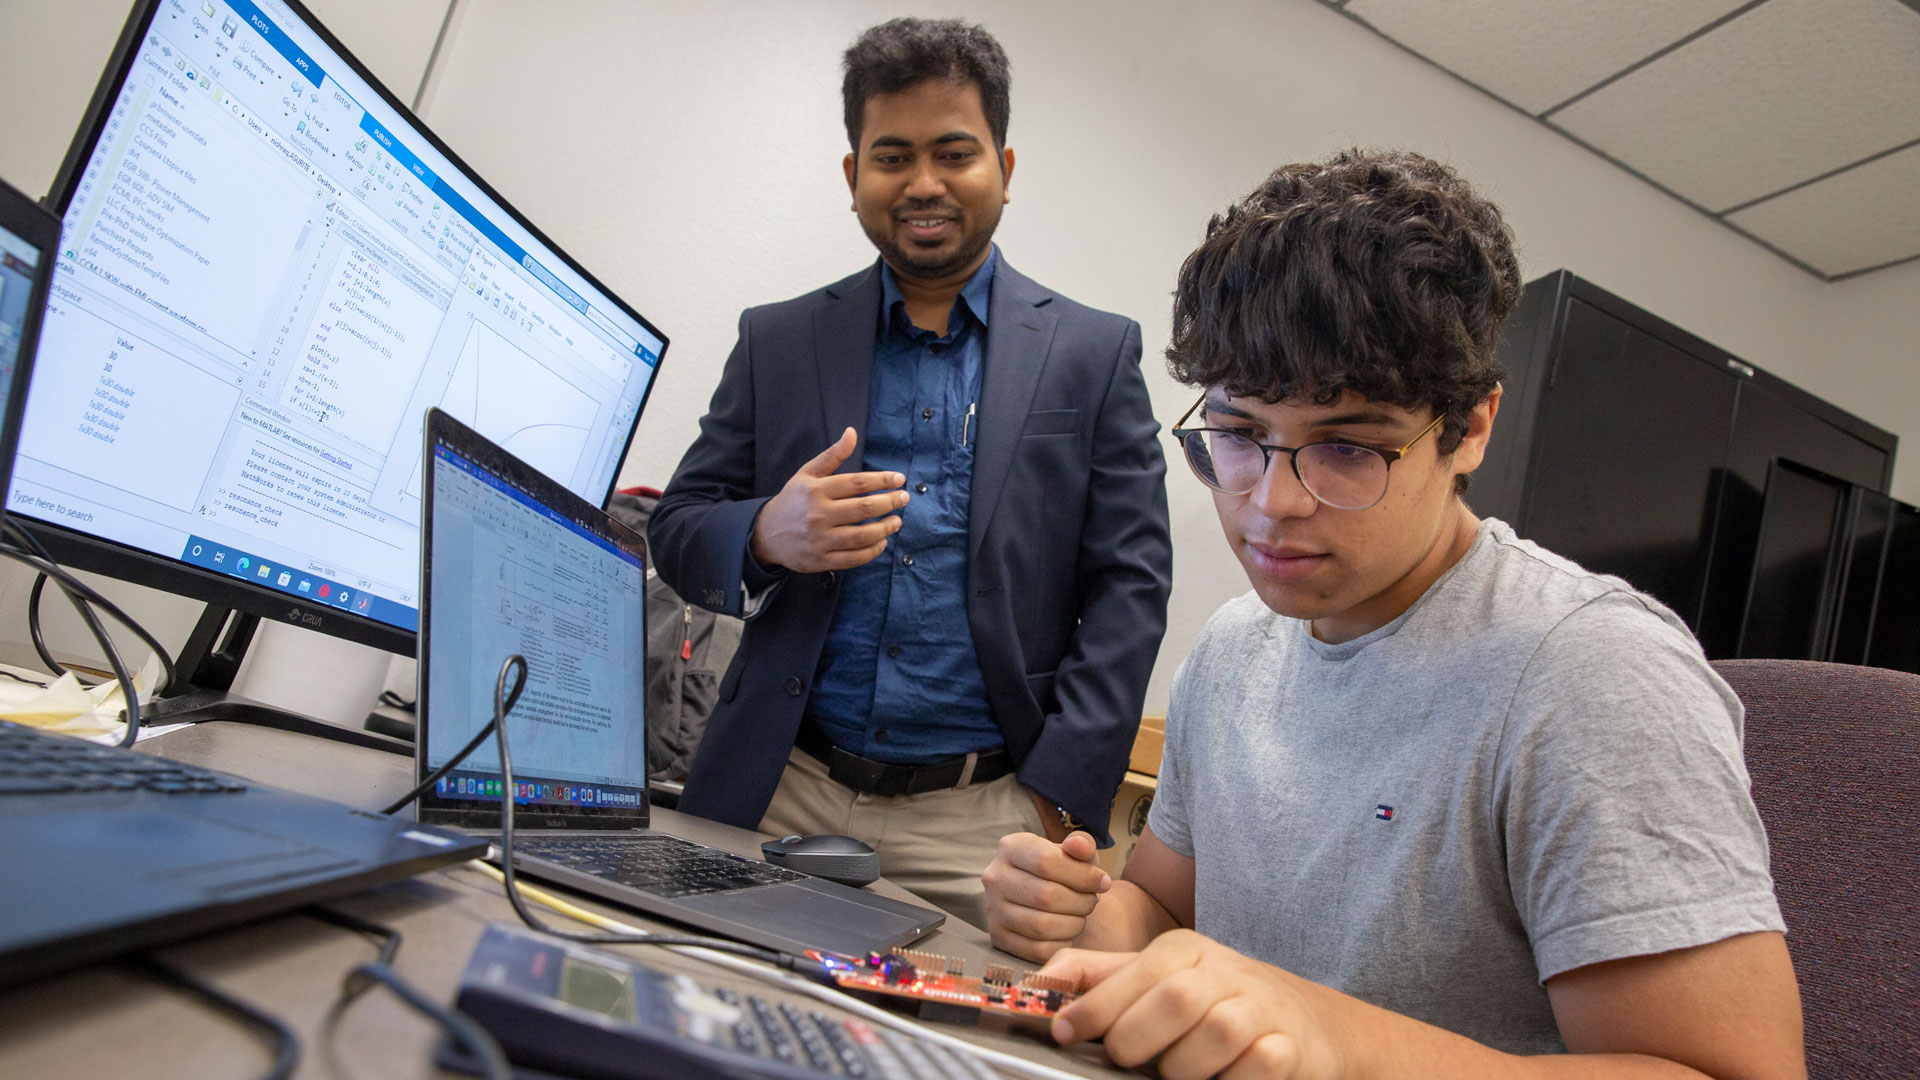 Engineering student Saif Elsaady works with Assistant Professor Ayan Mallik to explore electric vehicle cybersecurity as part of the FURI program in the Ira A. Fulton Schools of Engineering at ASU.